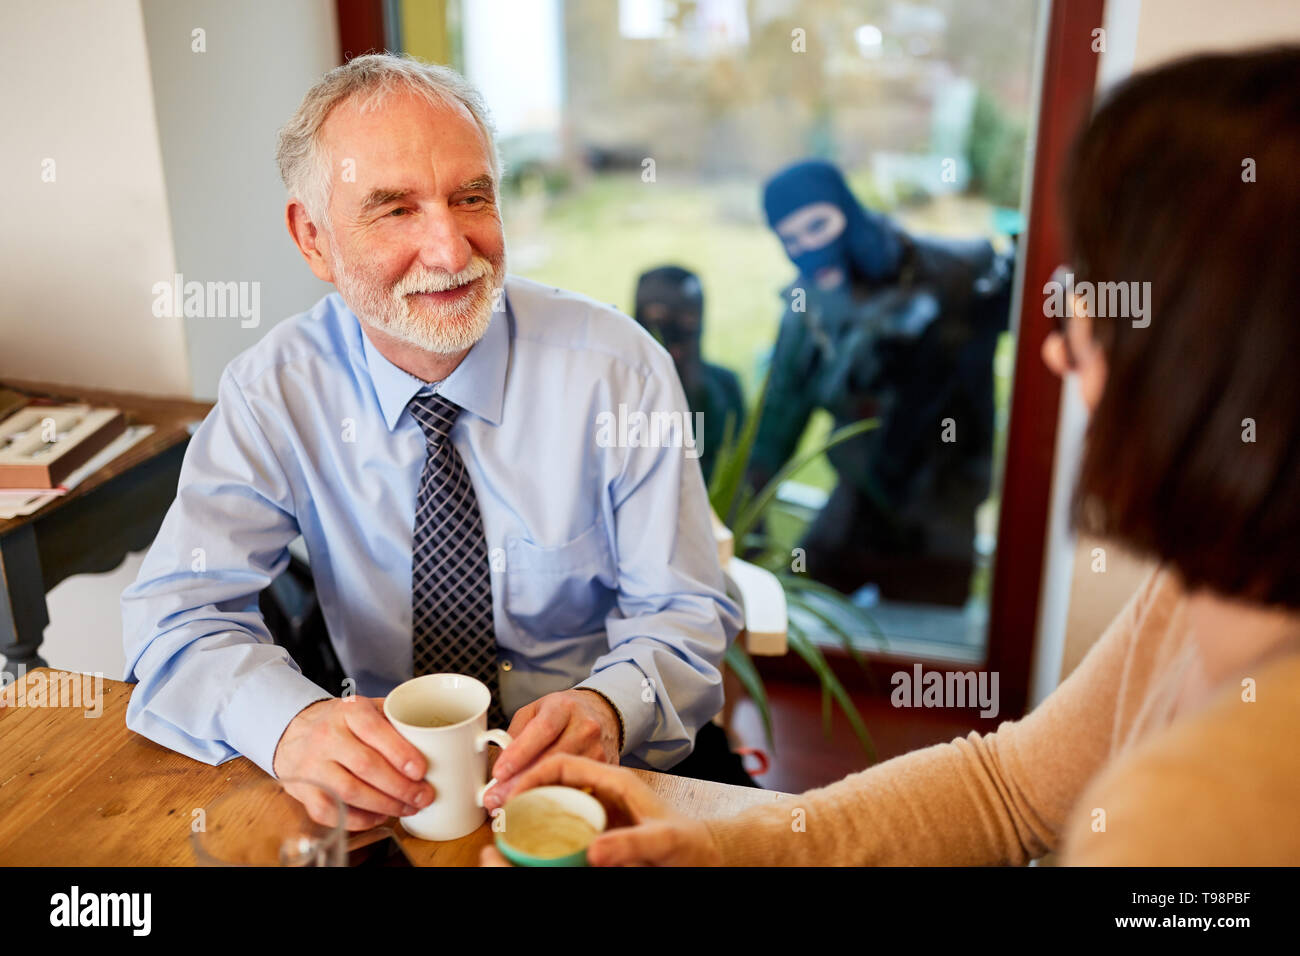 Two burglars watch a couple in the kitchen through a window Stock Photo